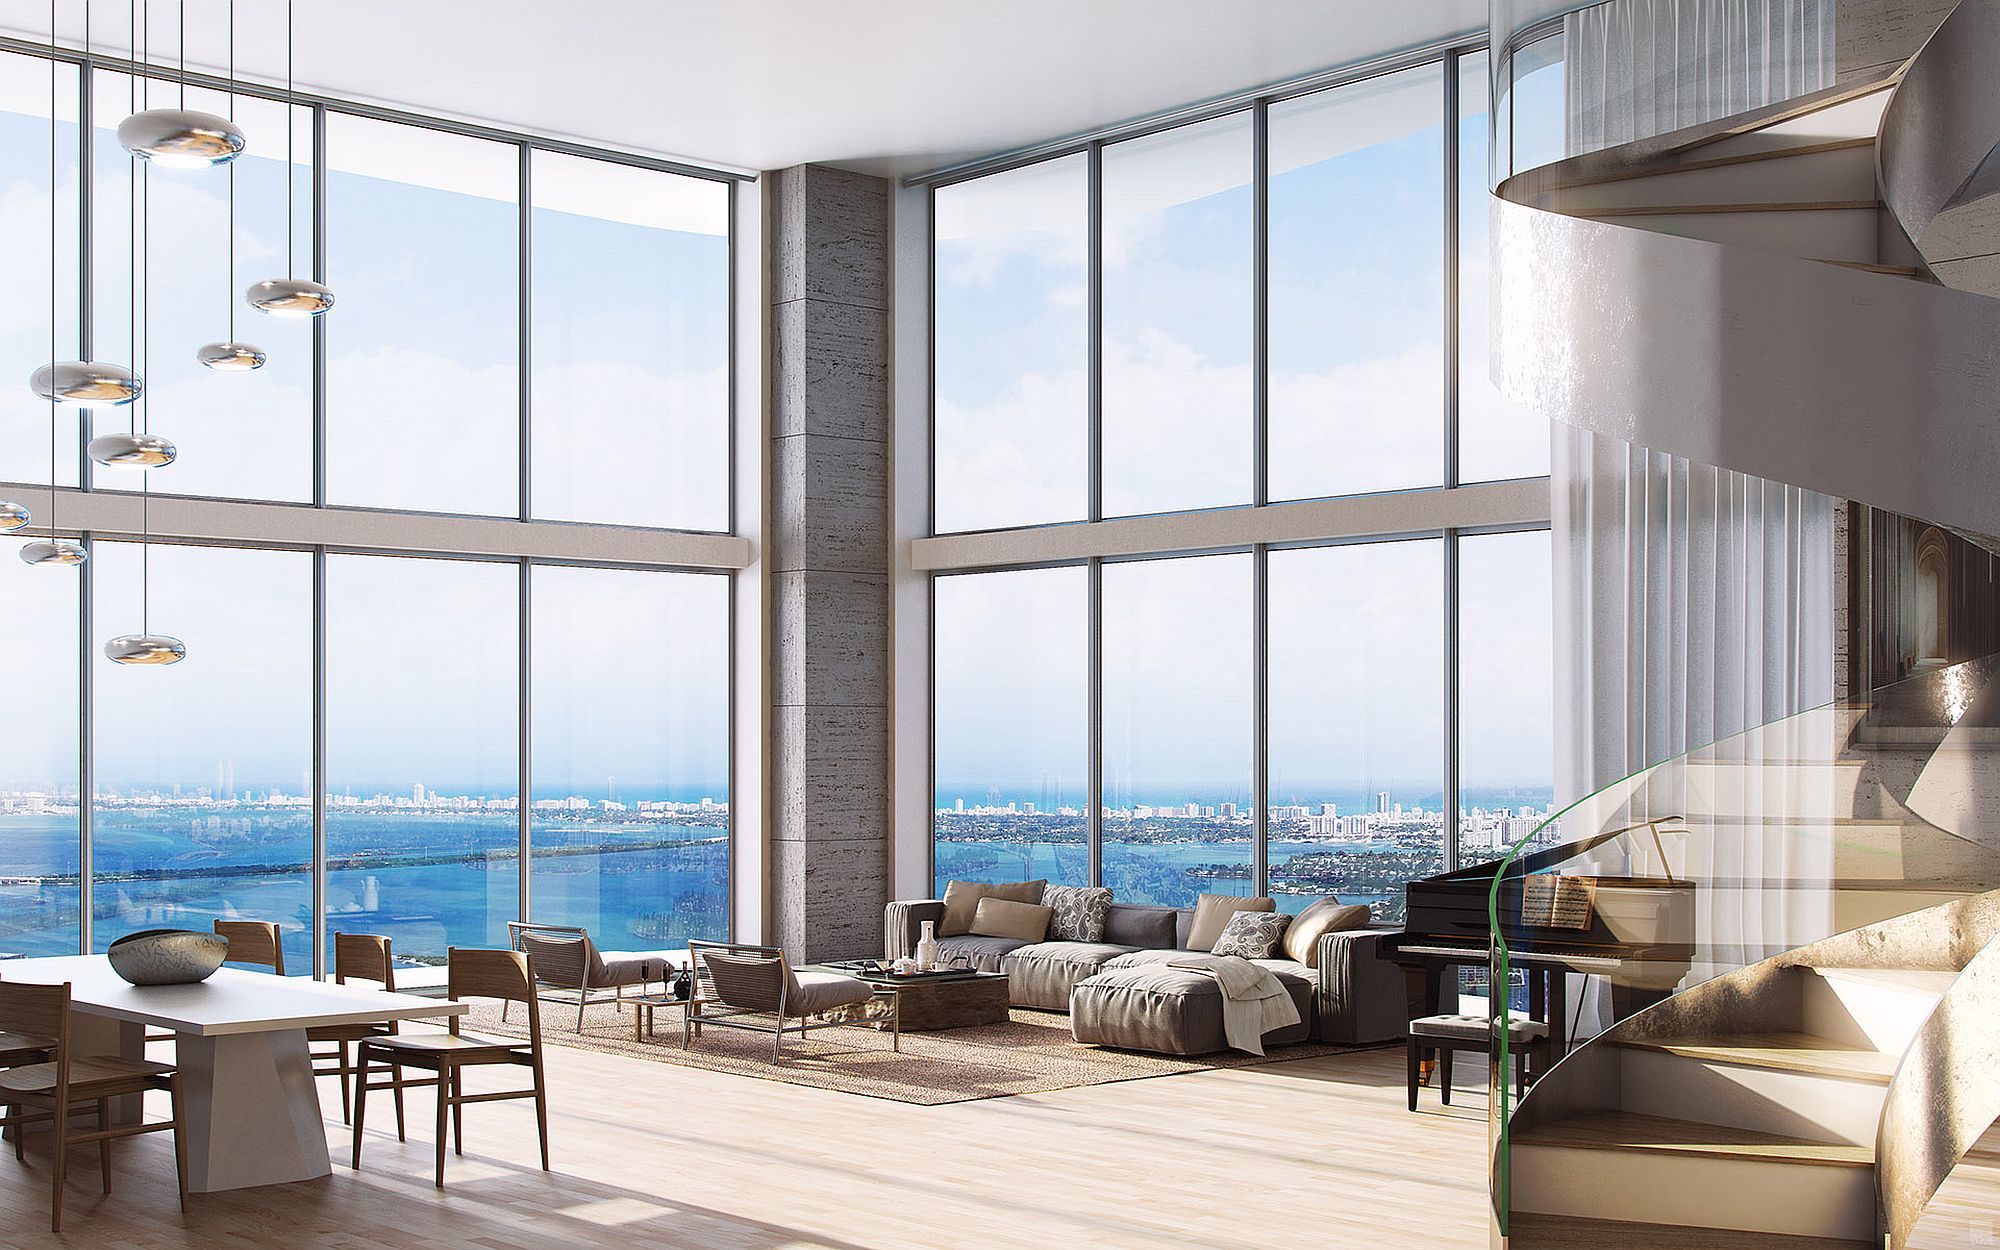 Interior of the apartment offers stunning views of city skyline thanks to floor-to-ceiling windows